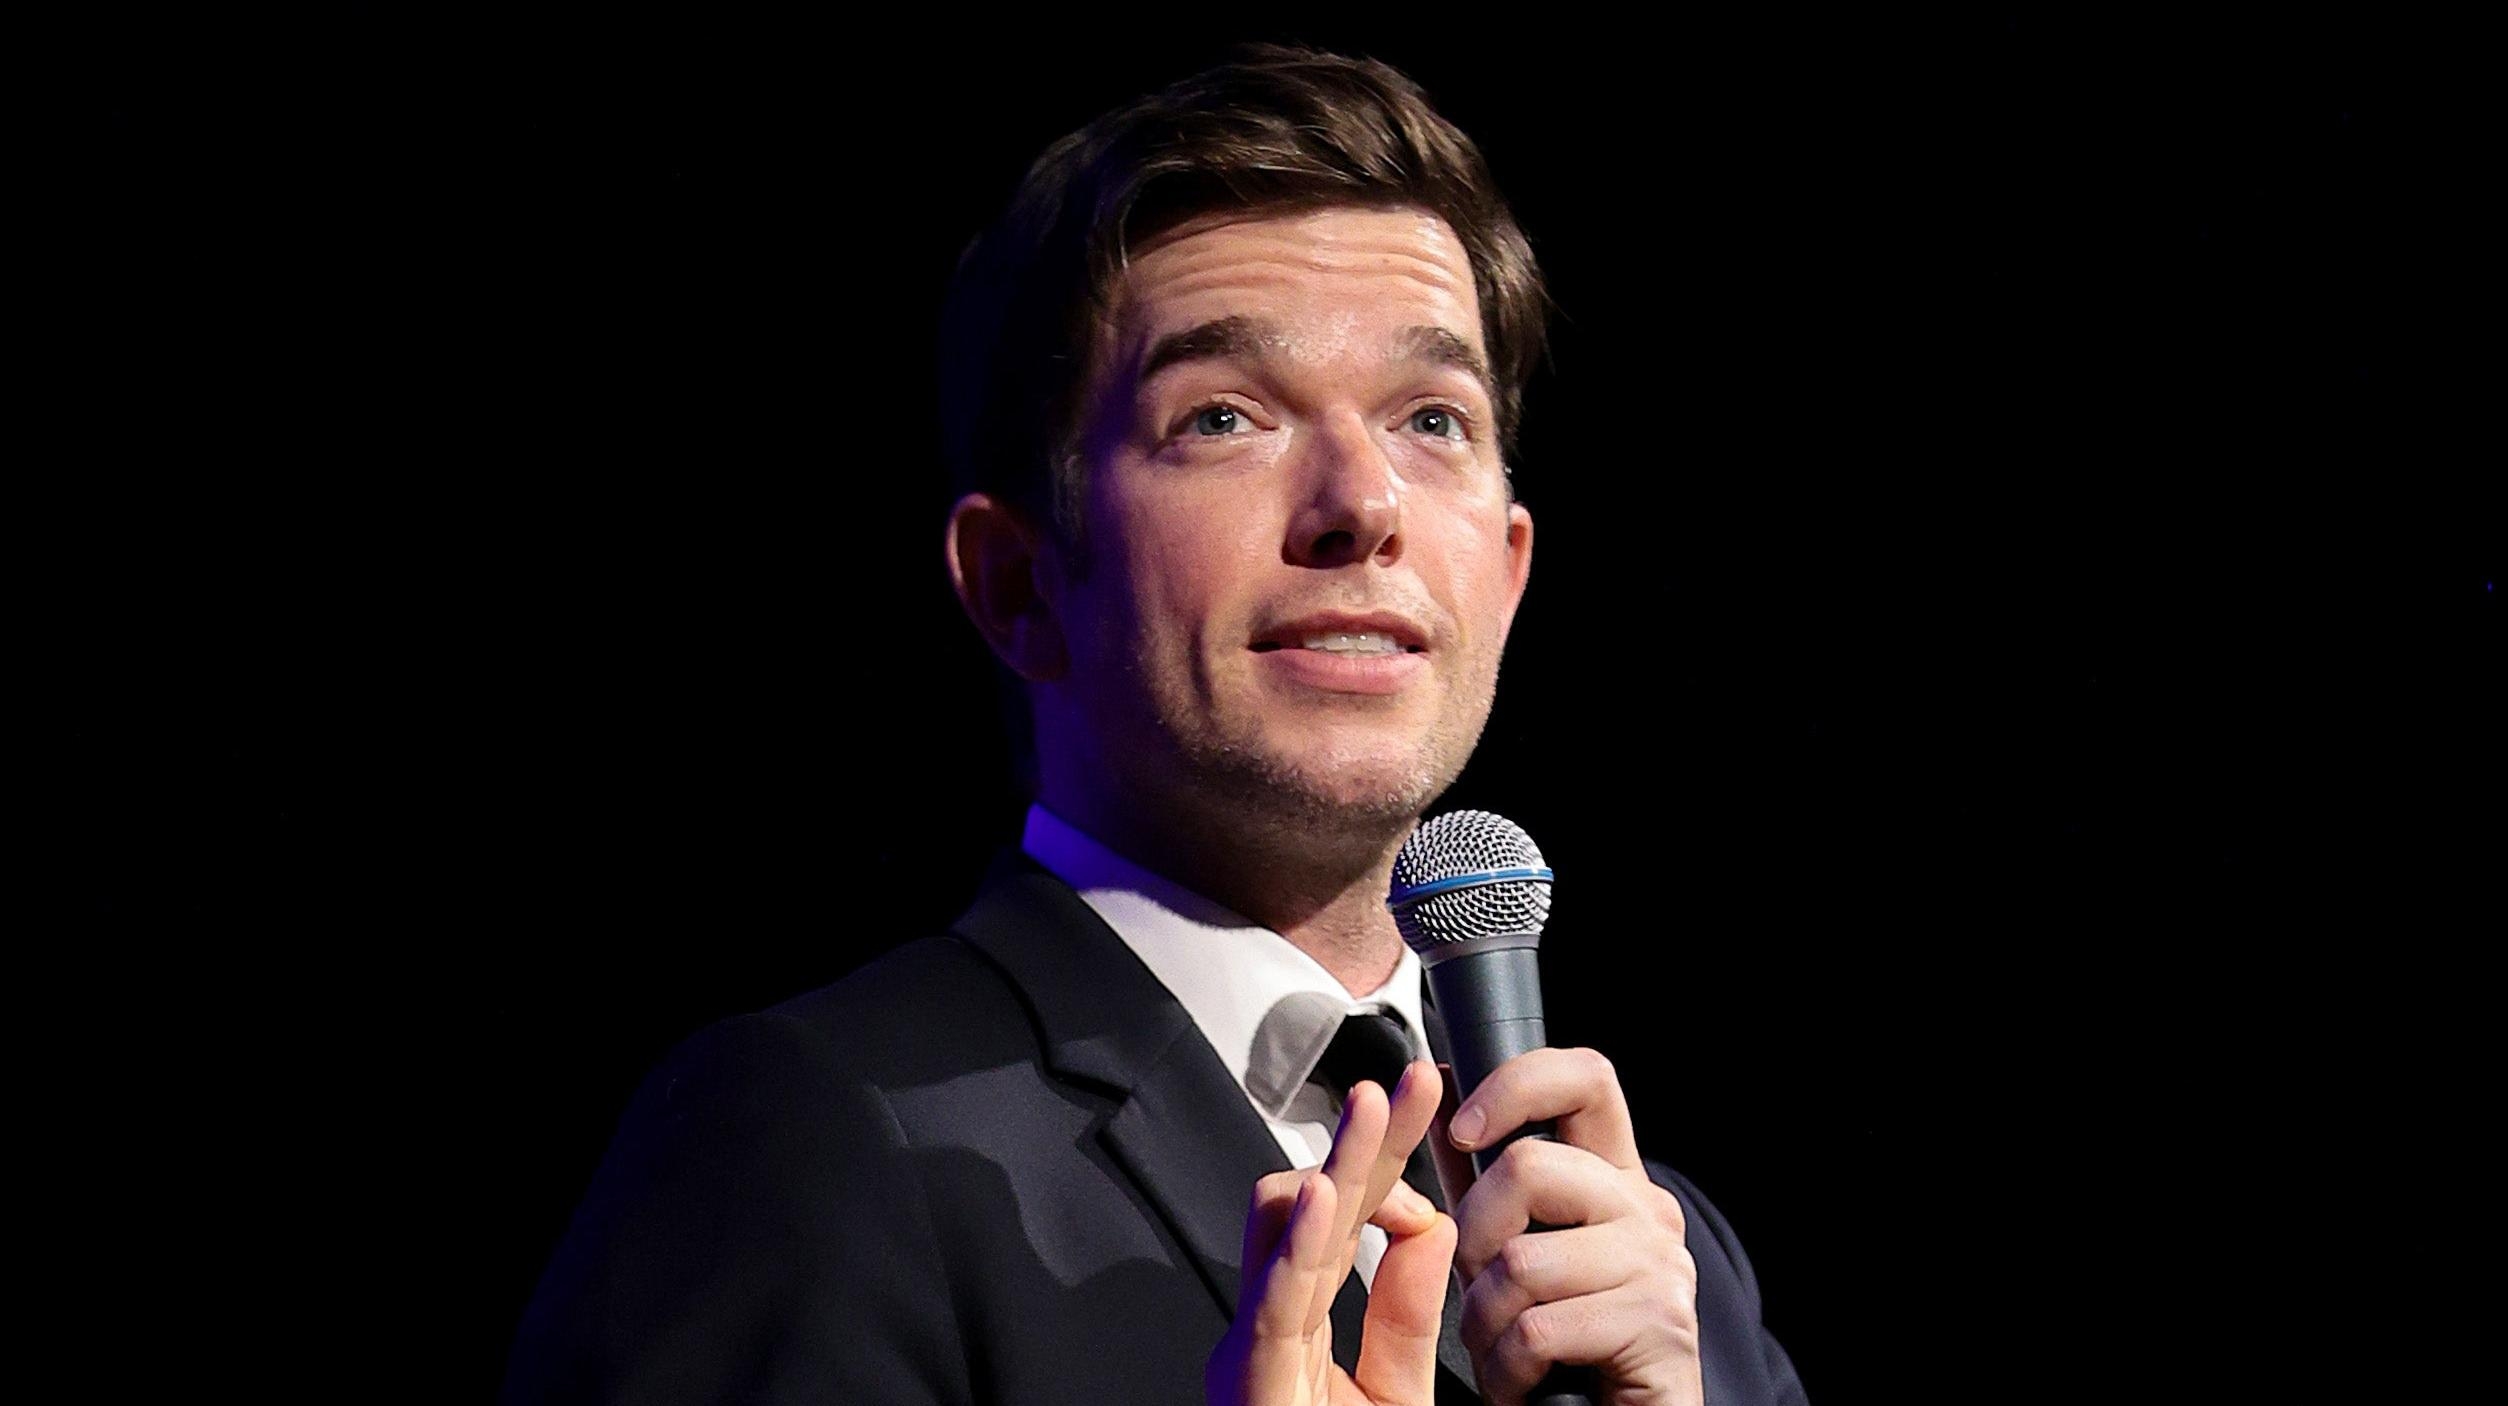 John Mulaney is heading on tour in 2022